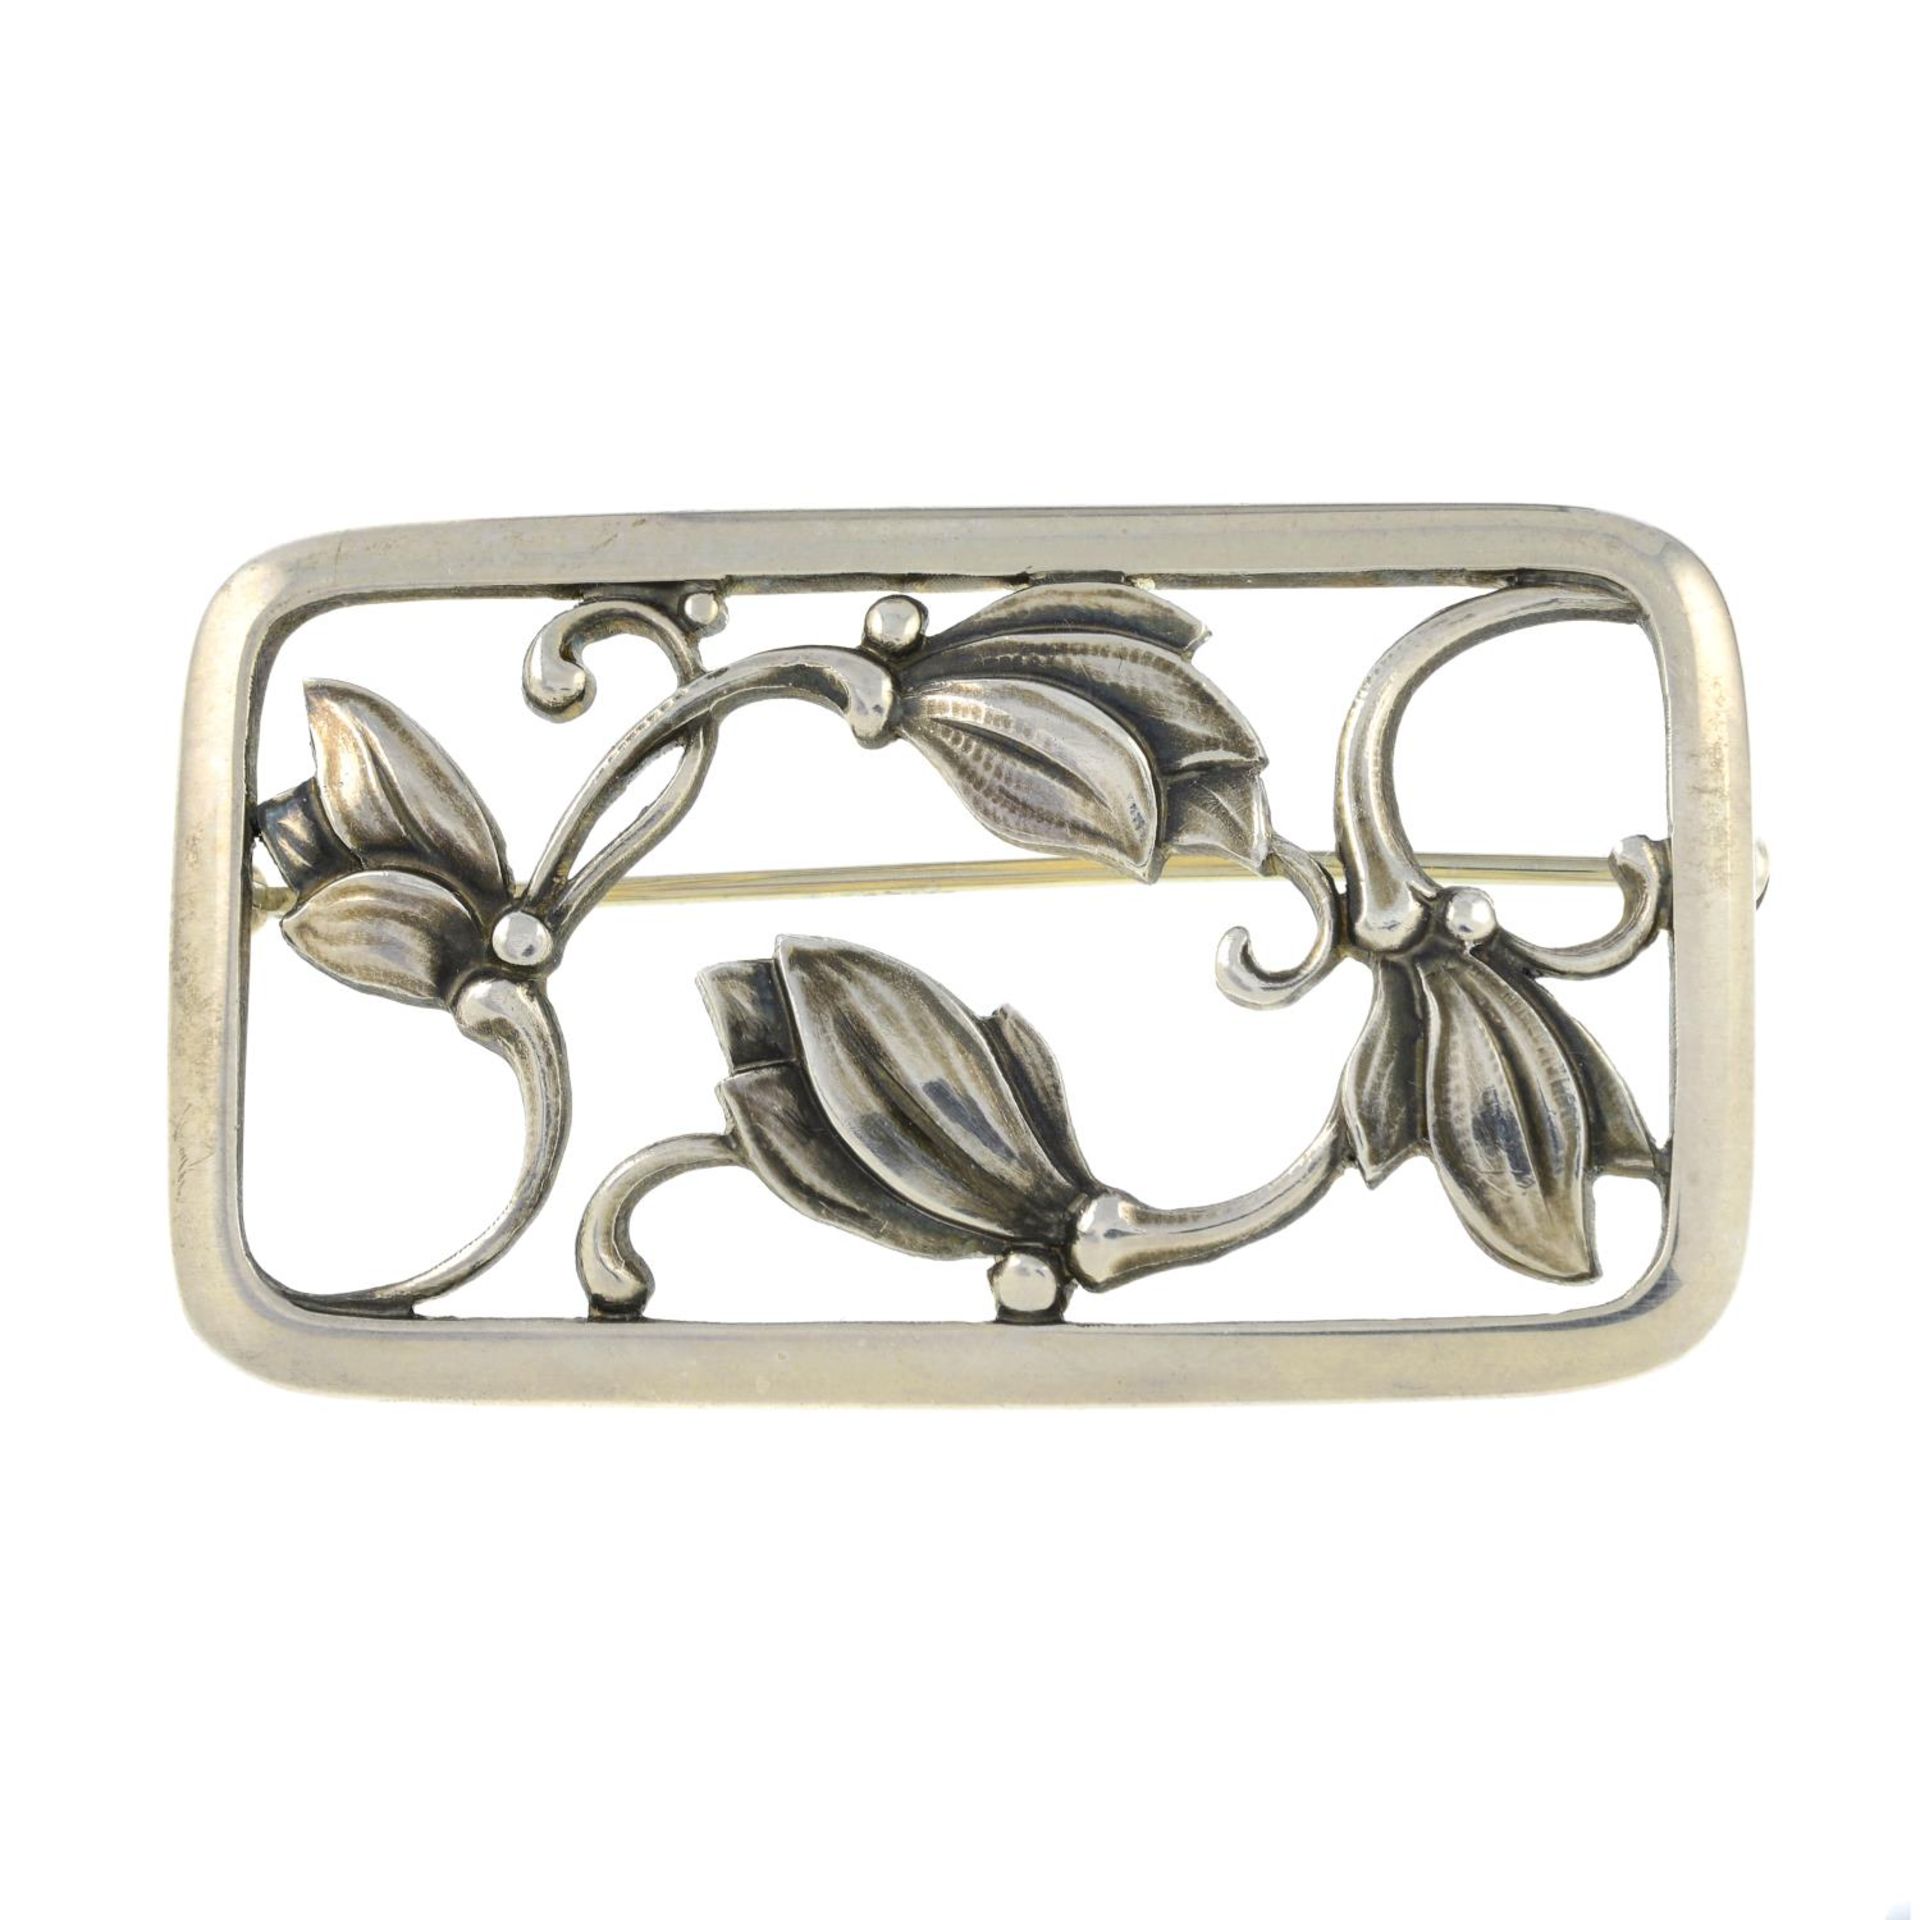 A silver floral brooch, by Georg Jensen.Import marks for silver.Length 5.4cms.